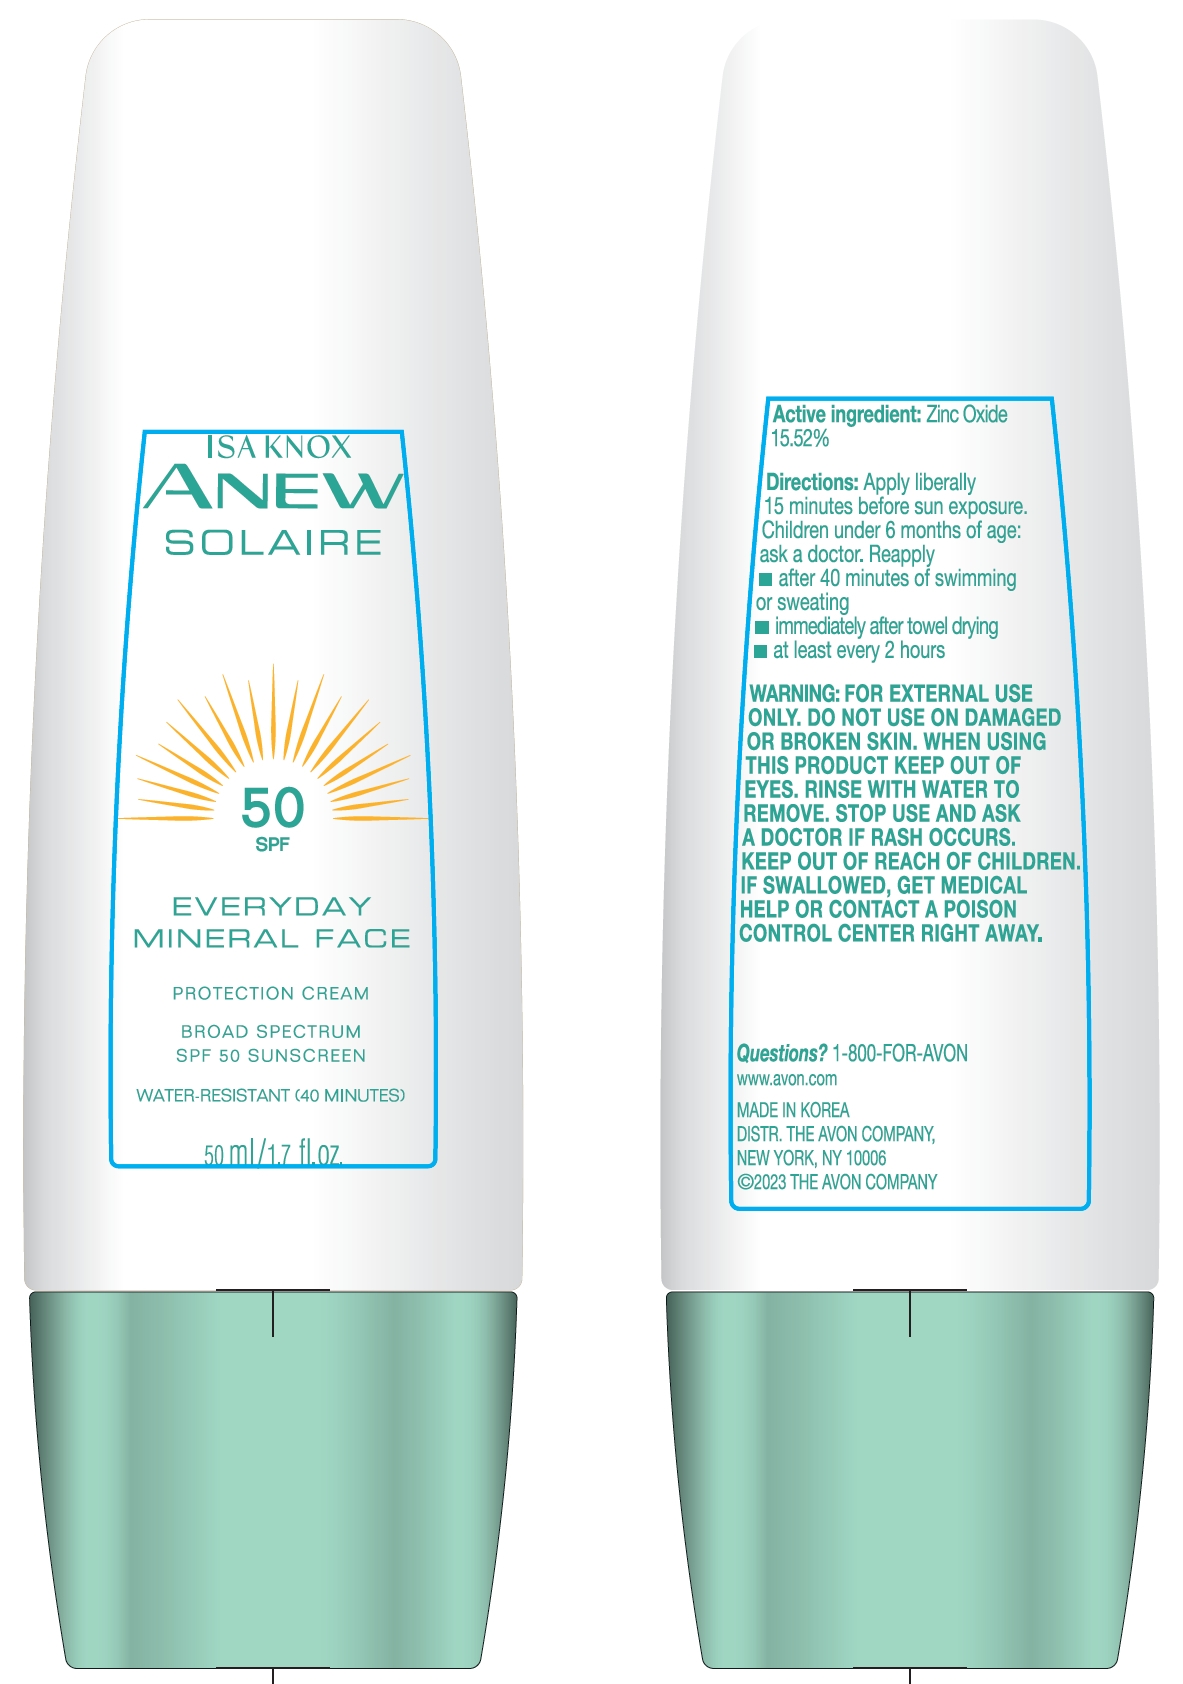 Isaknox Anew Solaire Mineral Face SPF50 IC